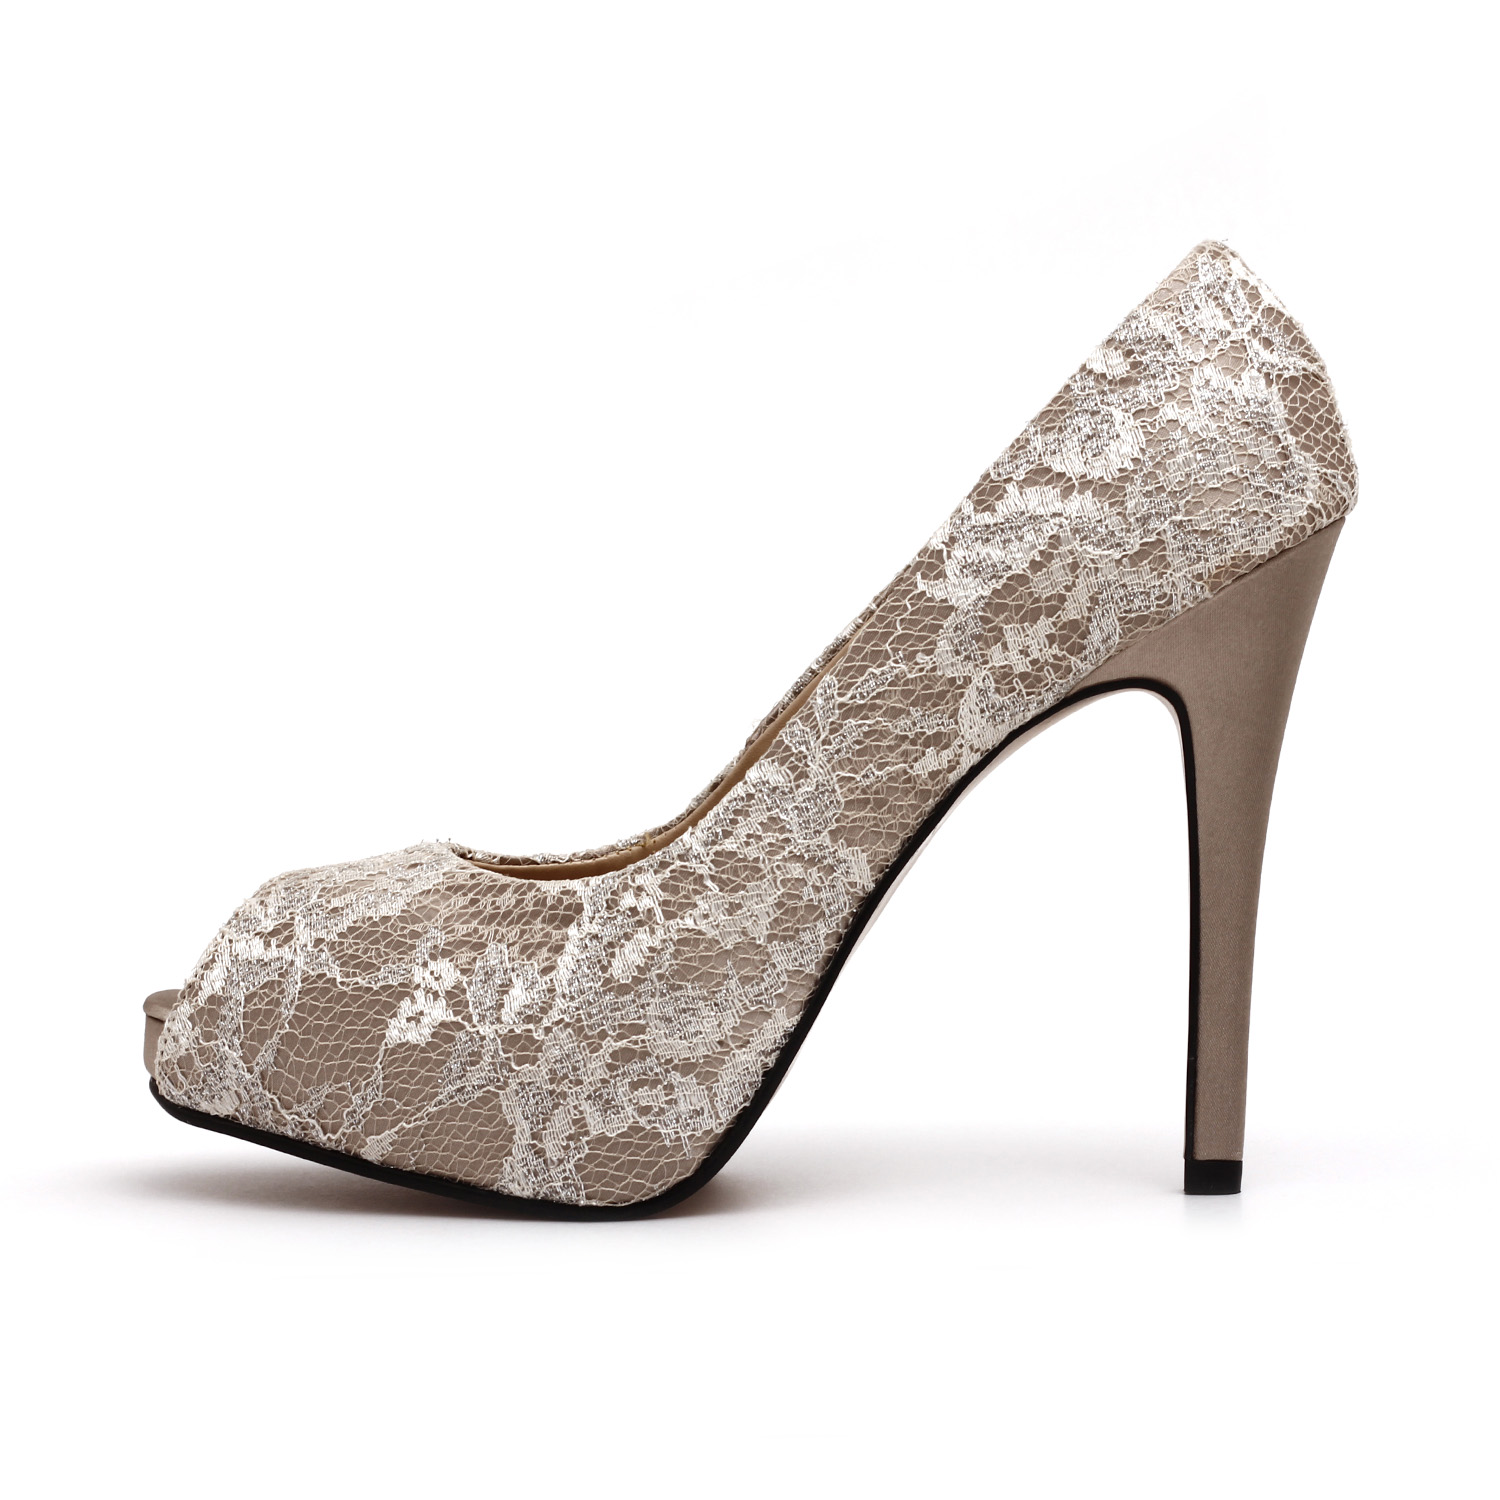 Champagne Colored Wedding Shoes 